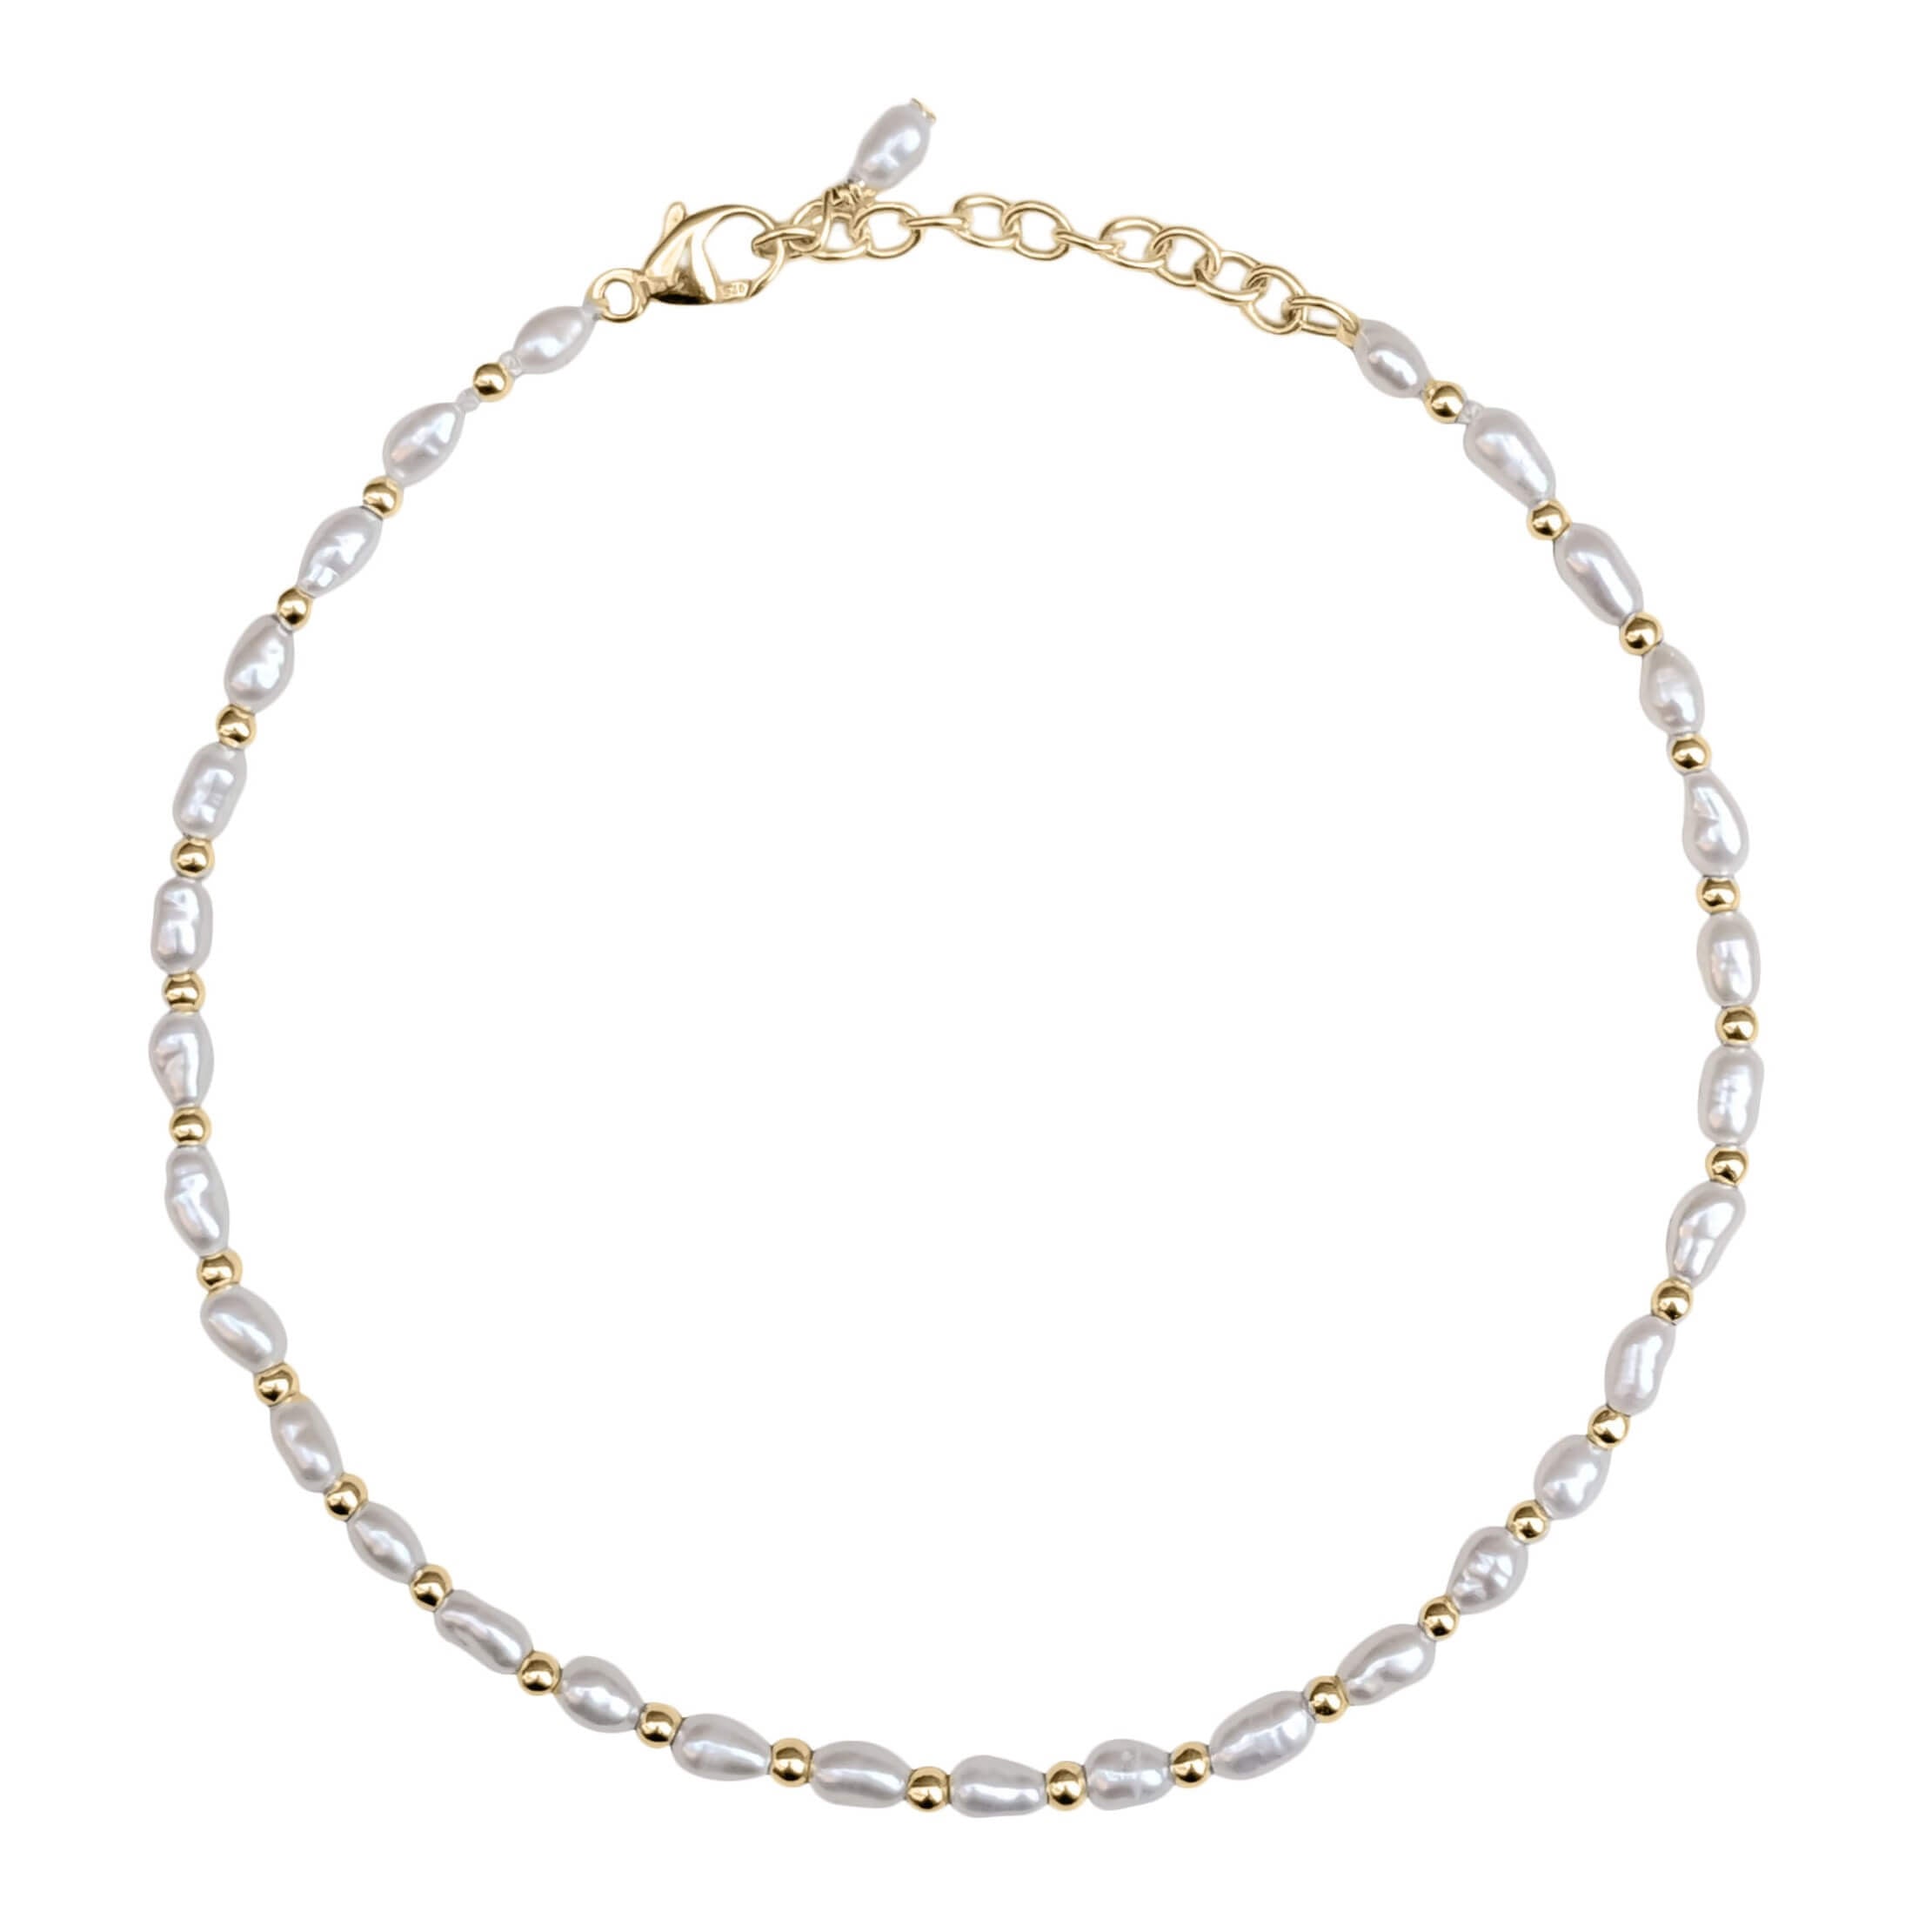 tiny pearl and gold filled bead bracelet on white background